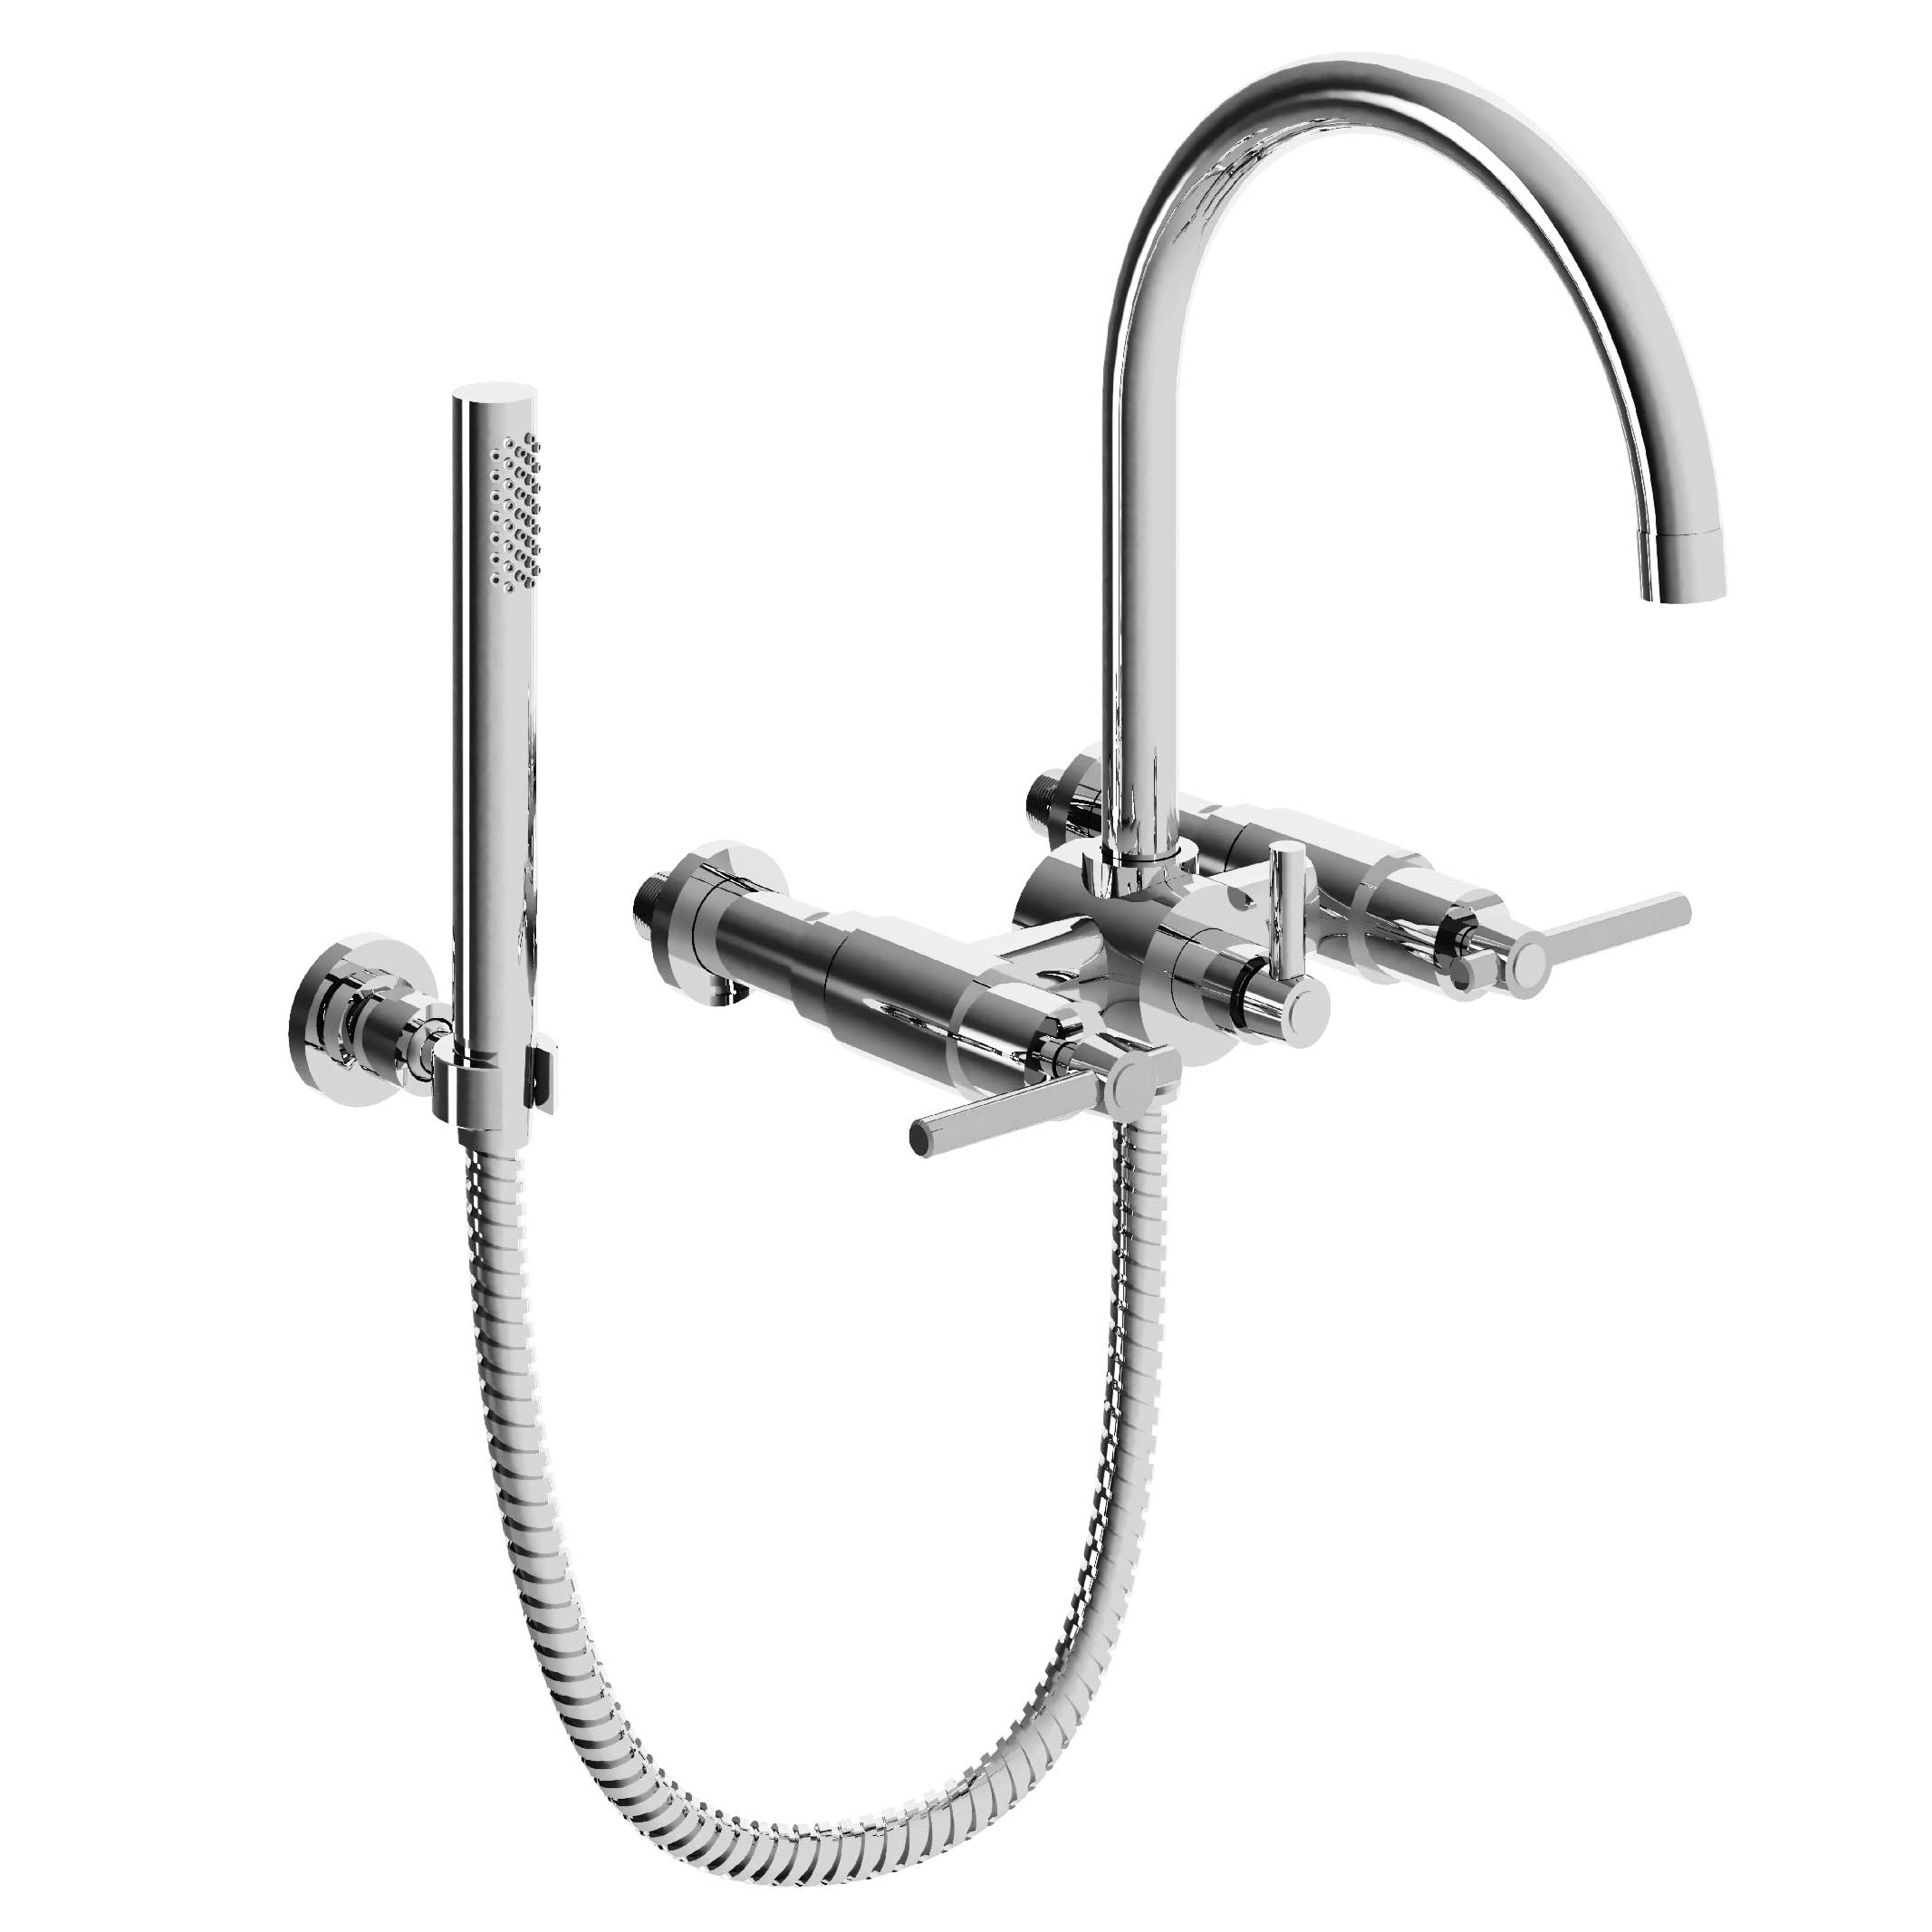 M91-3201 Wall mounted bath and shower mixer